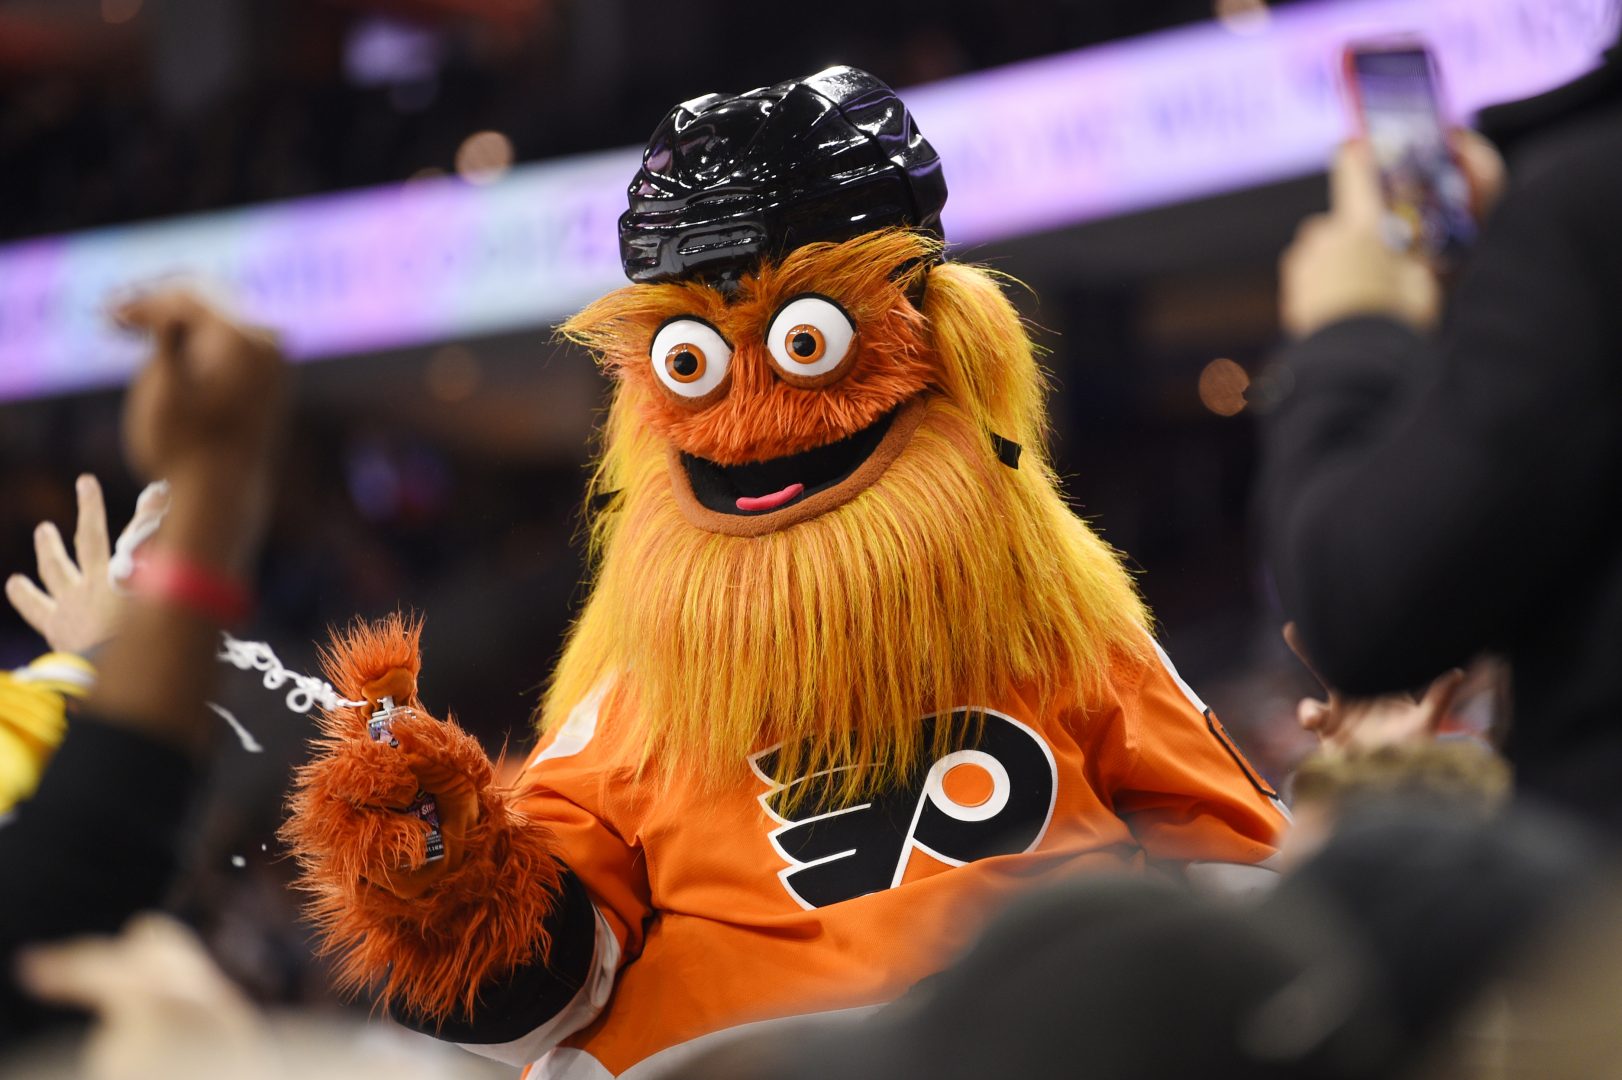 FILE PHOTO: In this Monday, Jan. 13, 2020 file photo, the Philadelphia Flyers' mascot, Gritty, performs during an NHL hockey game in Philadelphia.